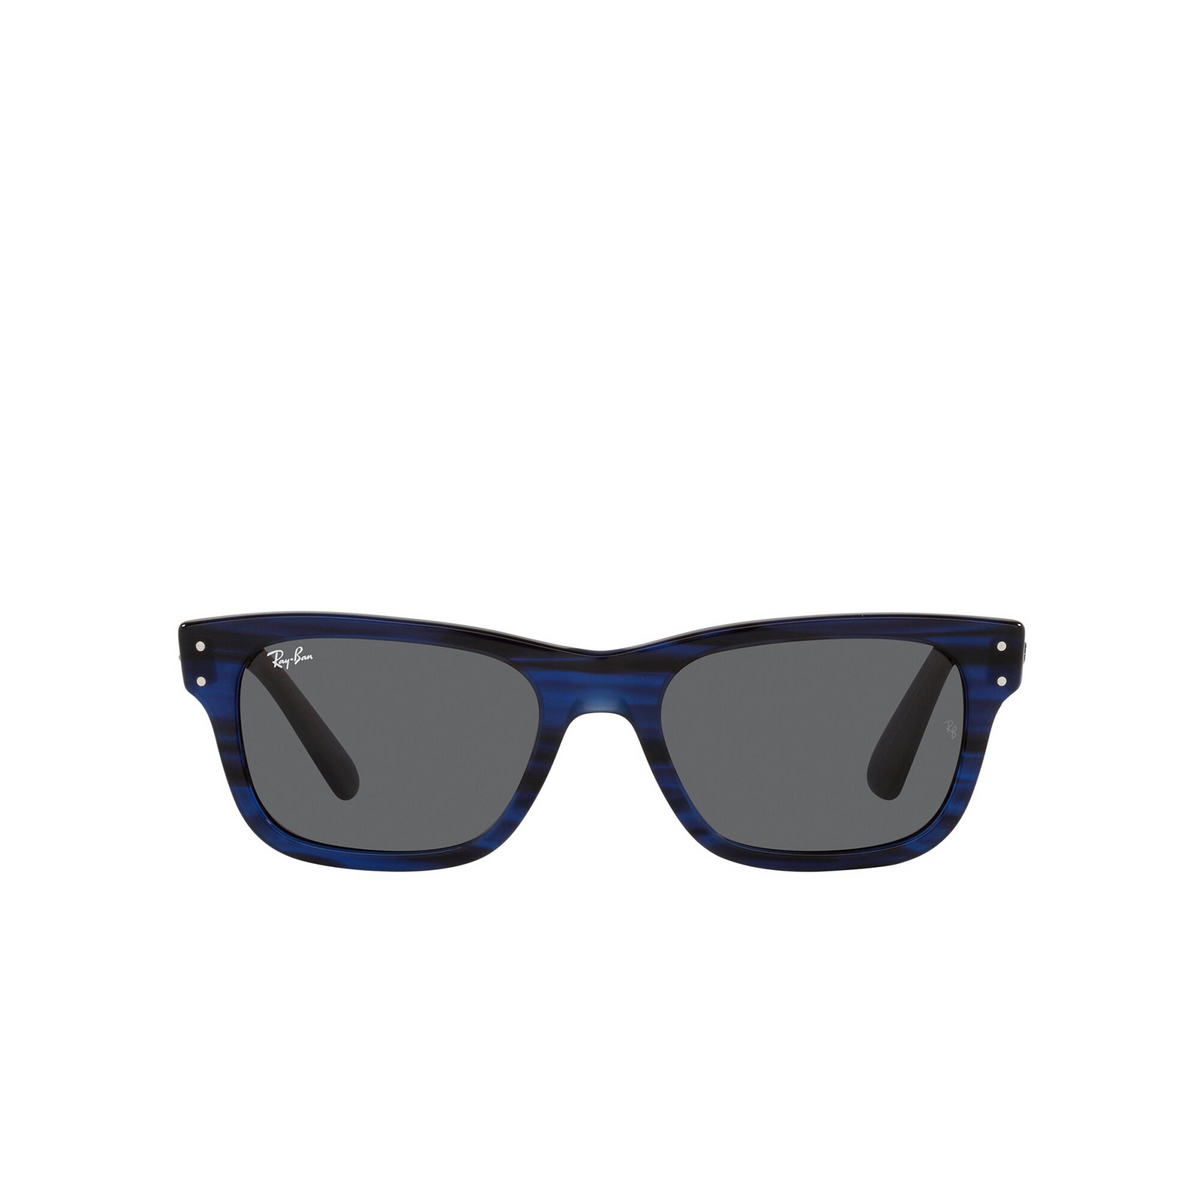 Ray-Ban® Rectangle Sunglasses: Mr Burbank RB2283 color Striped Blue 1339B1 - front view.